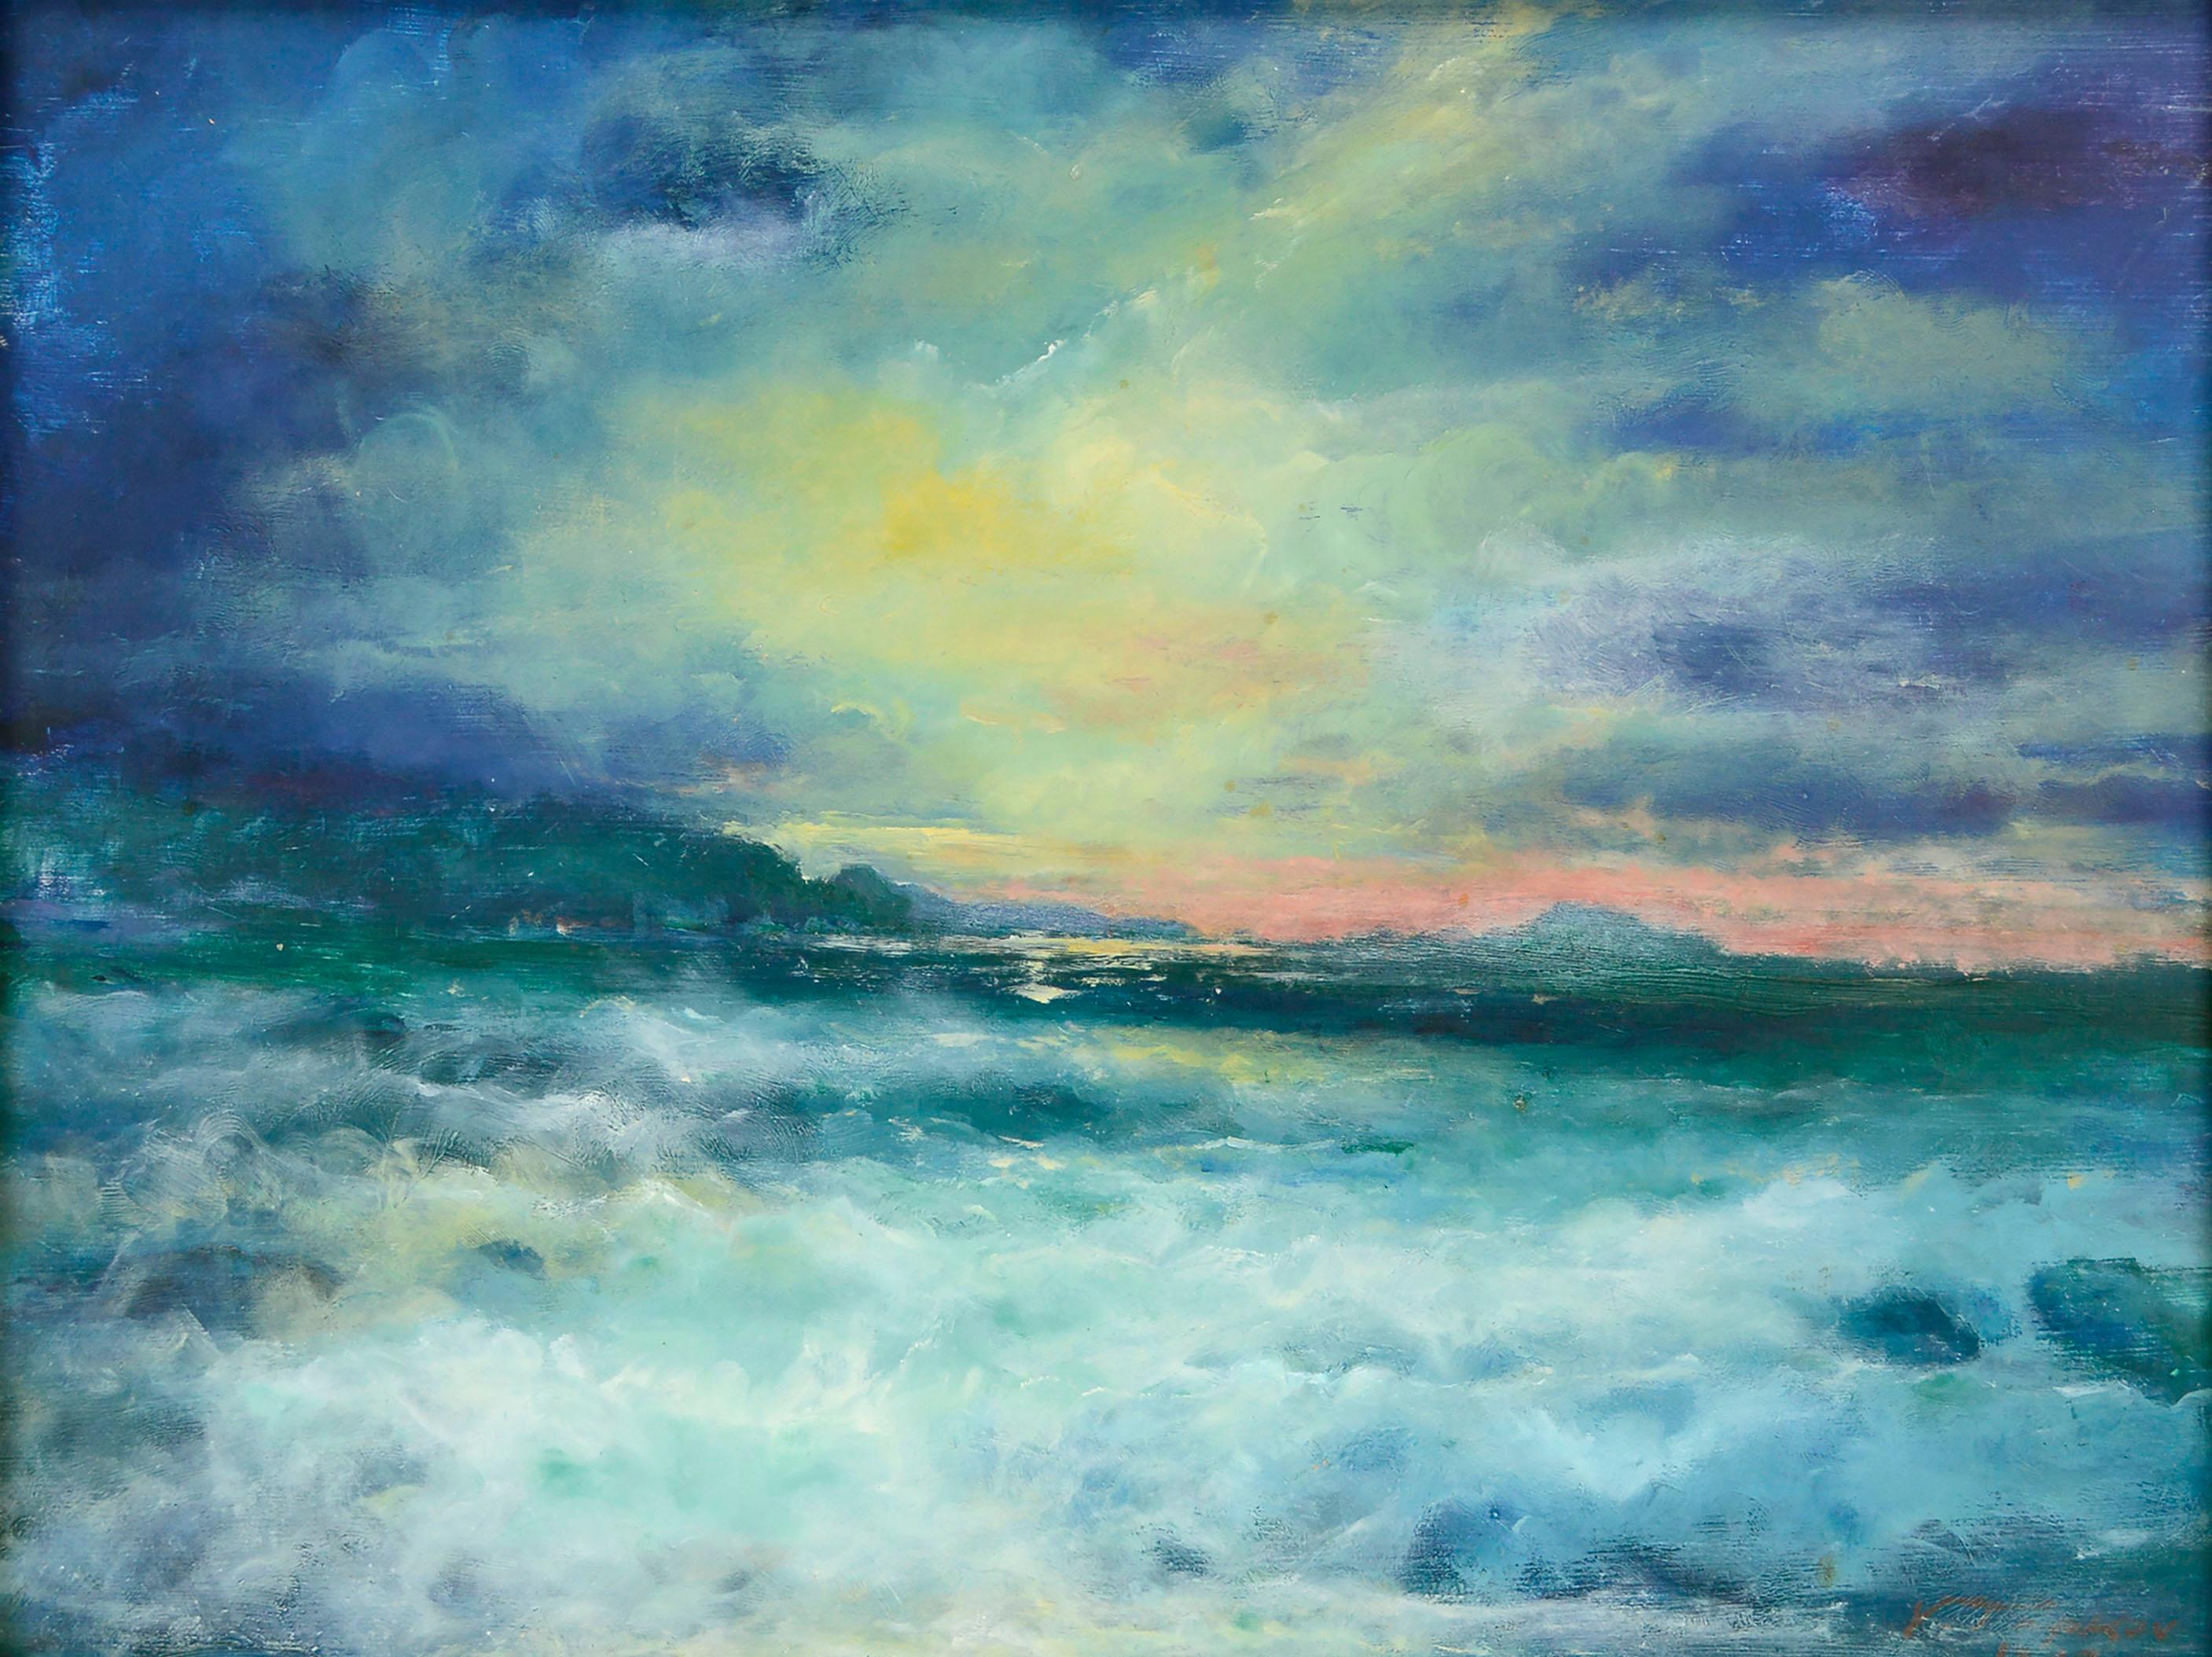 Stormy Sunset Seascape with Purple, Yellow & Green - Painting by Vasil Papkov